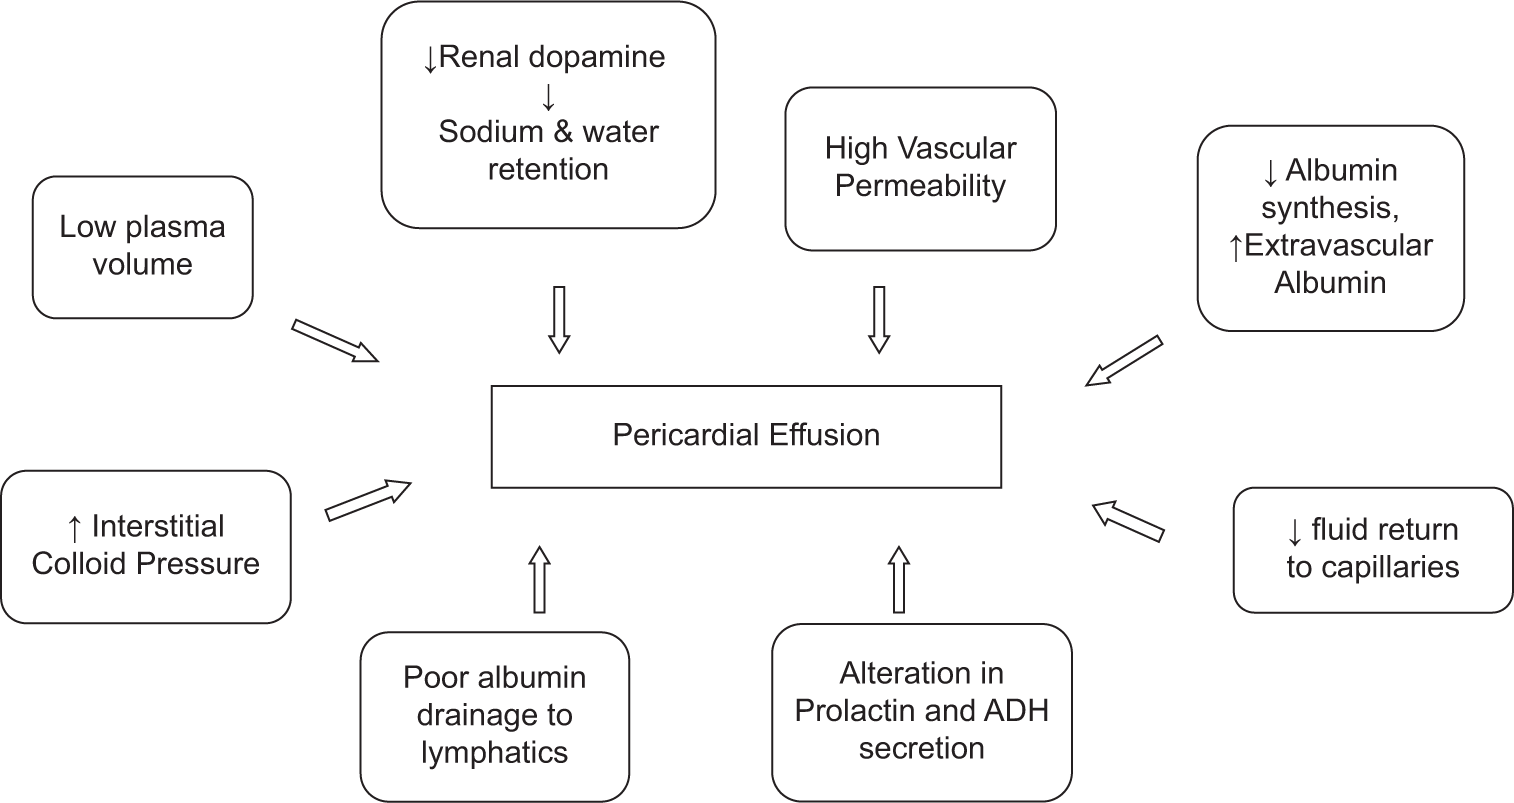 Pathophysiology of pericardial effusion.